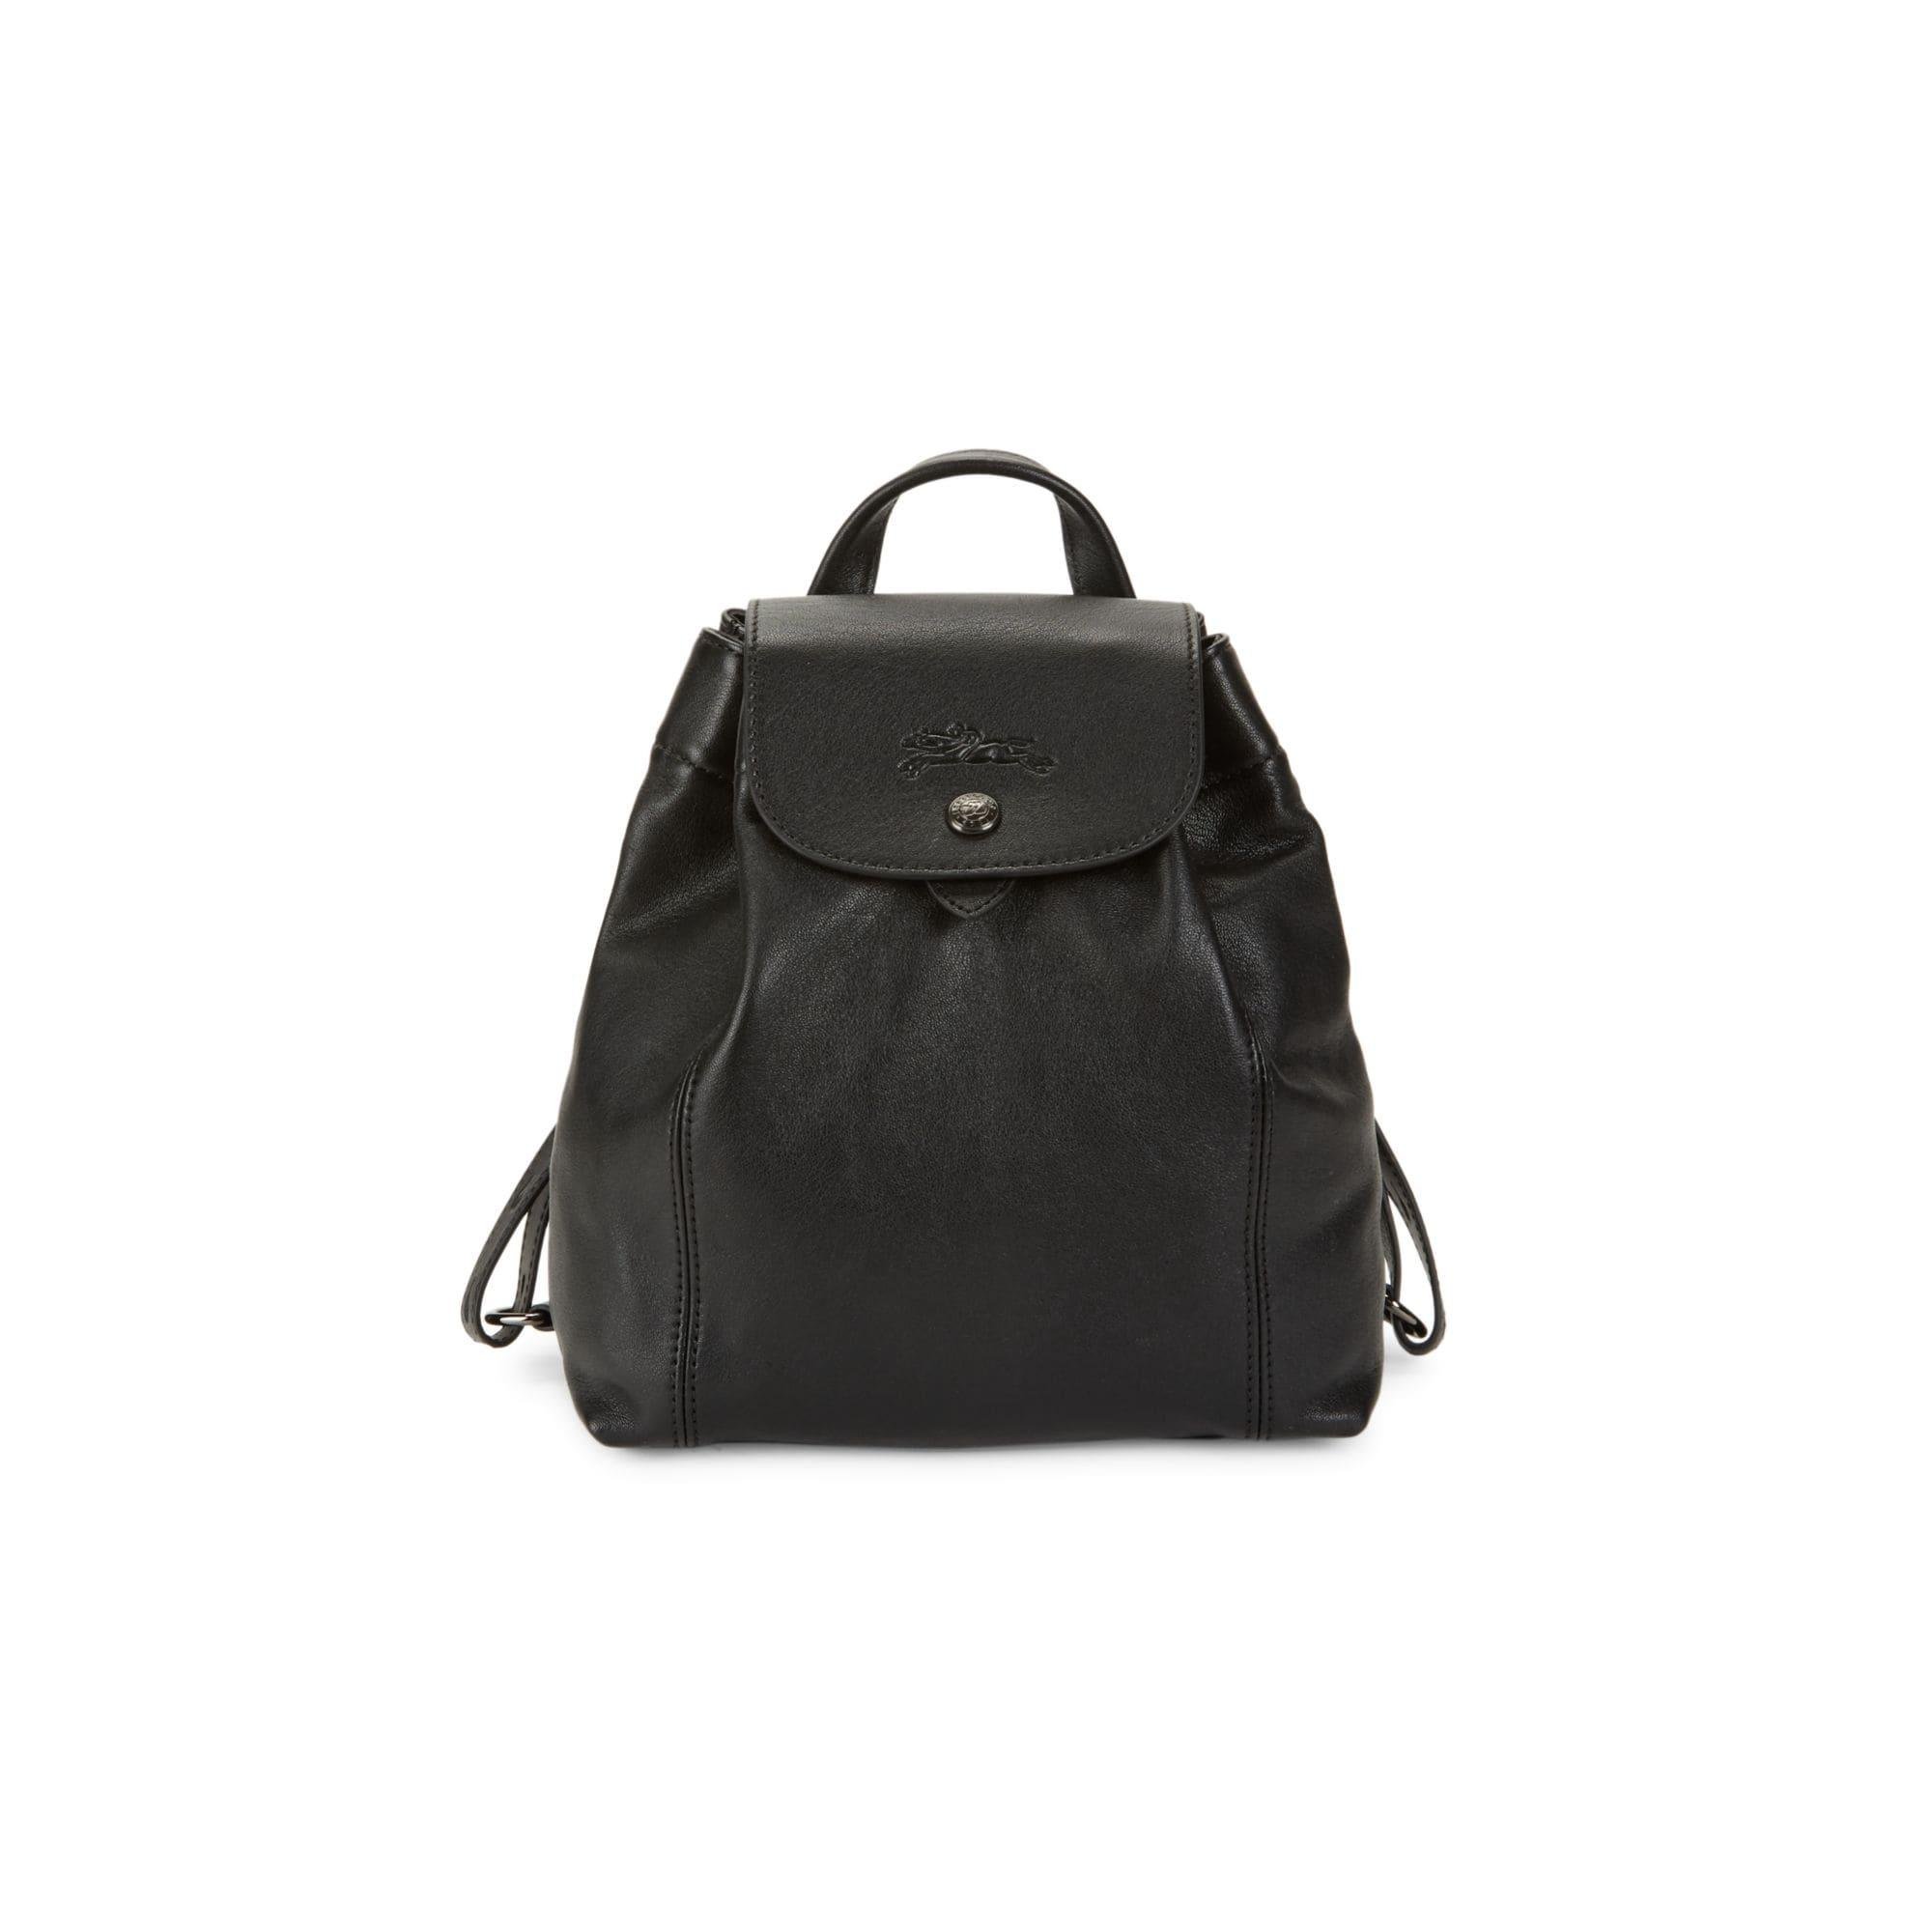 Longchamp Mini Le Pliage Cuir Leather Drawstring Backpack in Black